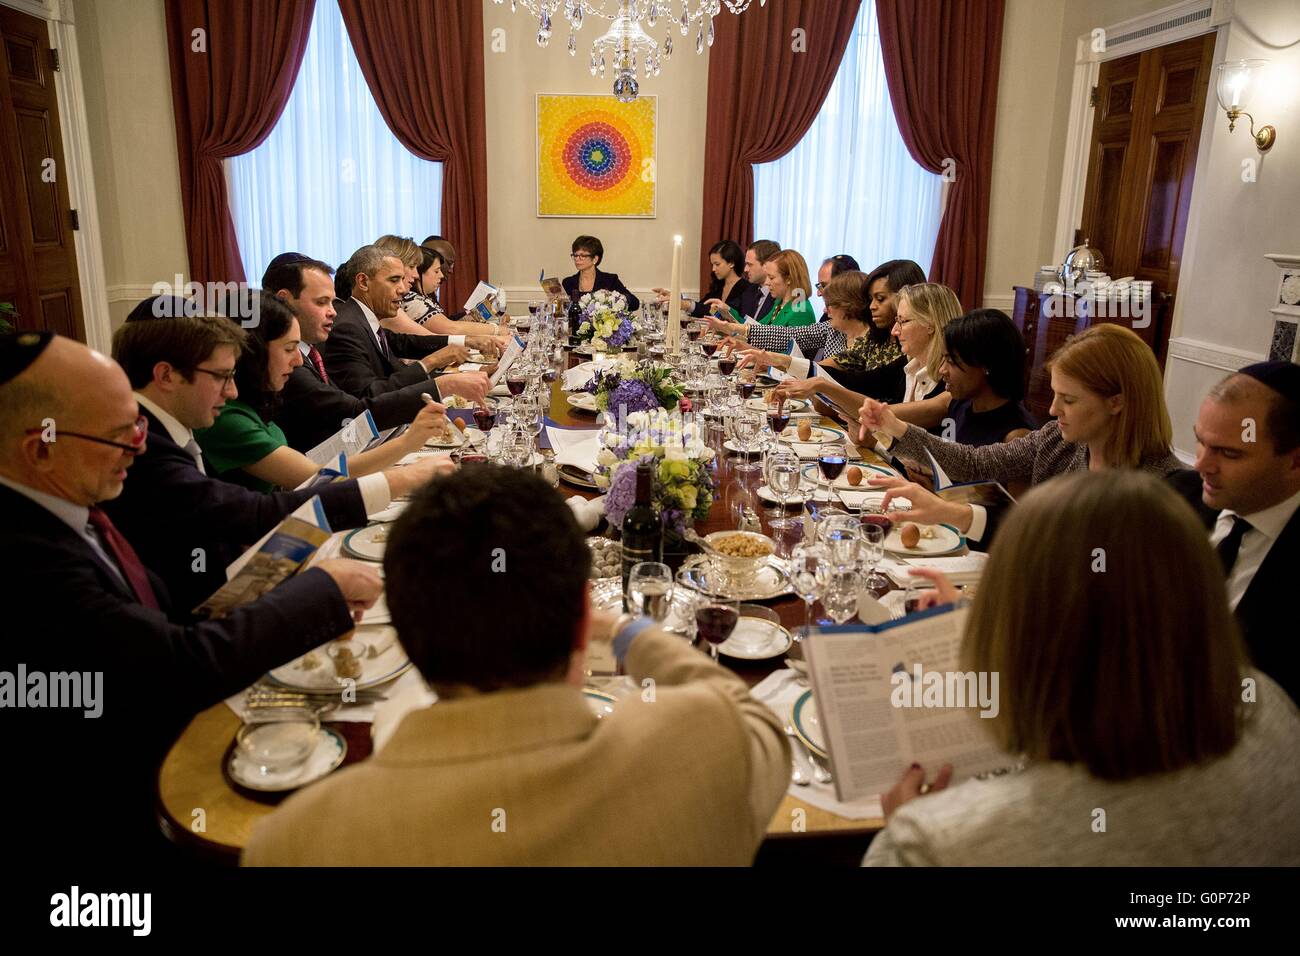 U.S President Barack Obama and First Lady Michelle Obama host a Passover Seder dinner with friends and staff in the Old Family Dining Room of the White House April 28, 2016 in Washington, D.C. Stock Photo